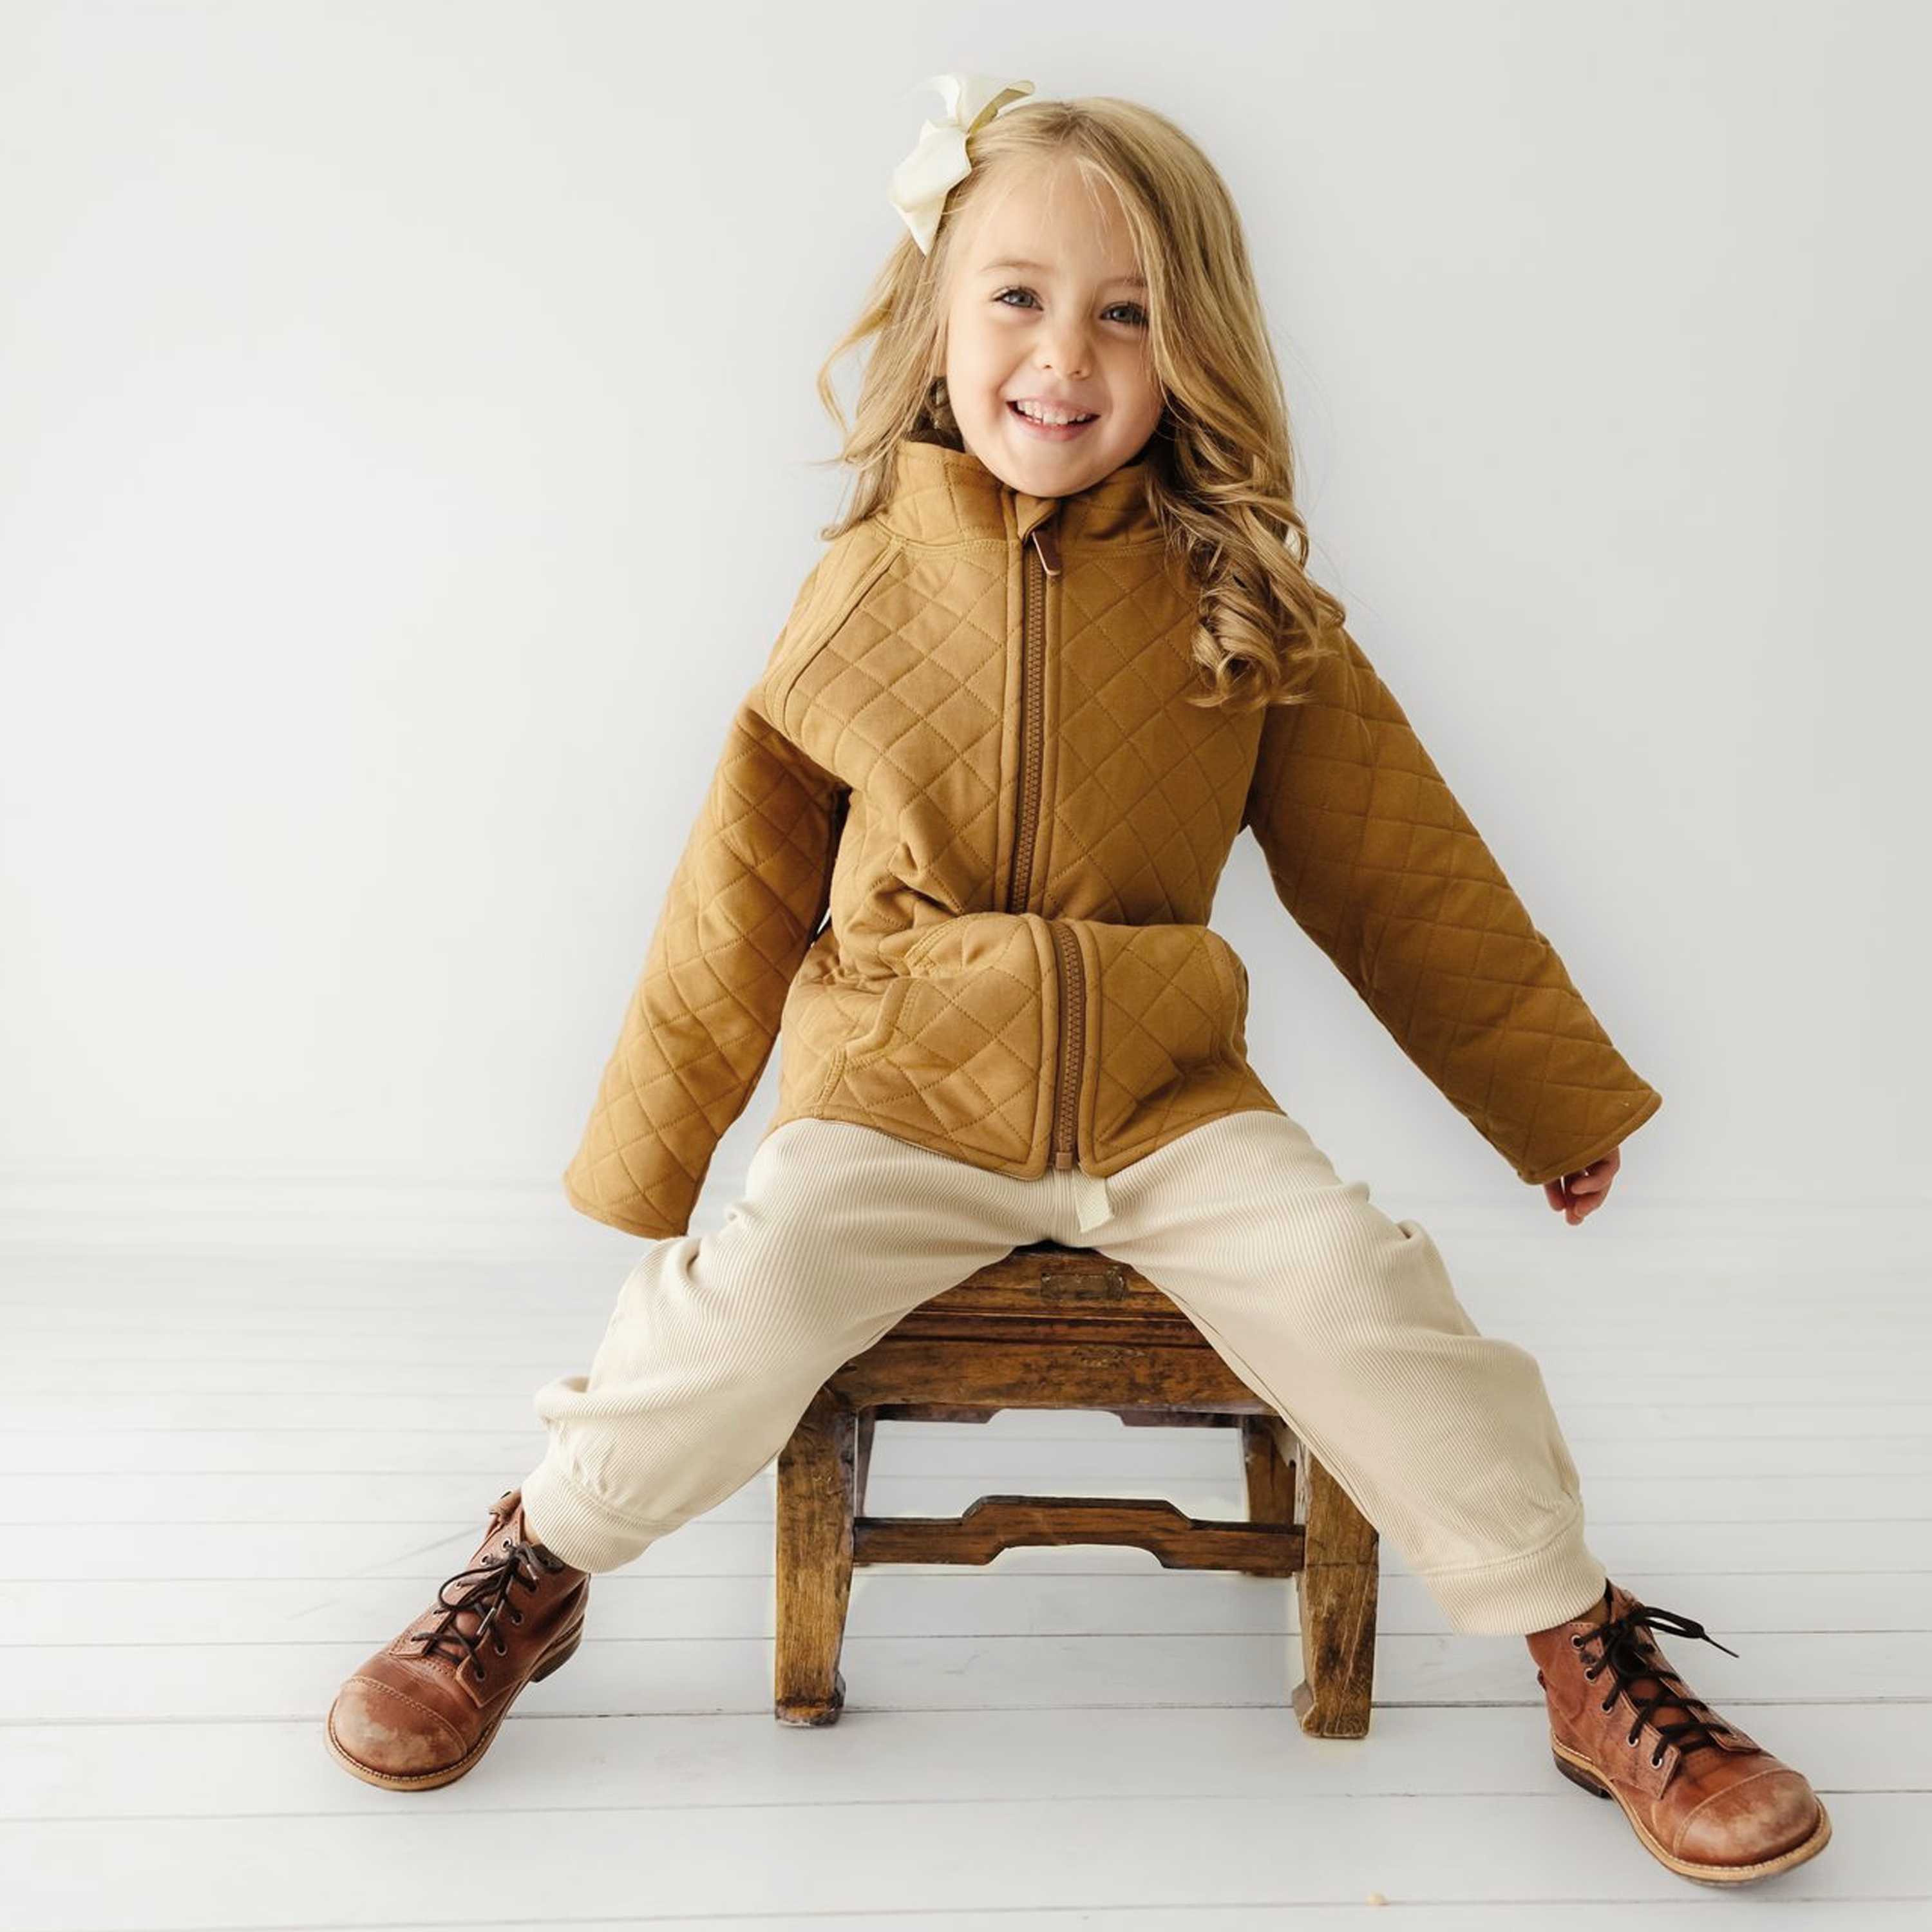 A joyful young girl wearing an Organic Kids Organic Merino Wool Zip Jacket in tan and cream pants, sitting on a rustic wooden stool against a white background, with a big smile and a white flower in her hair.